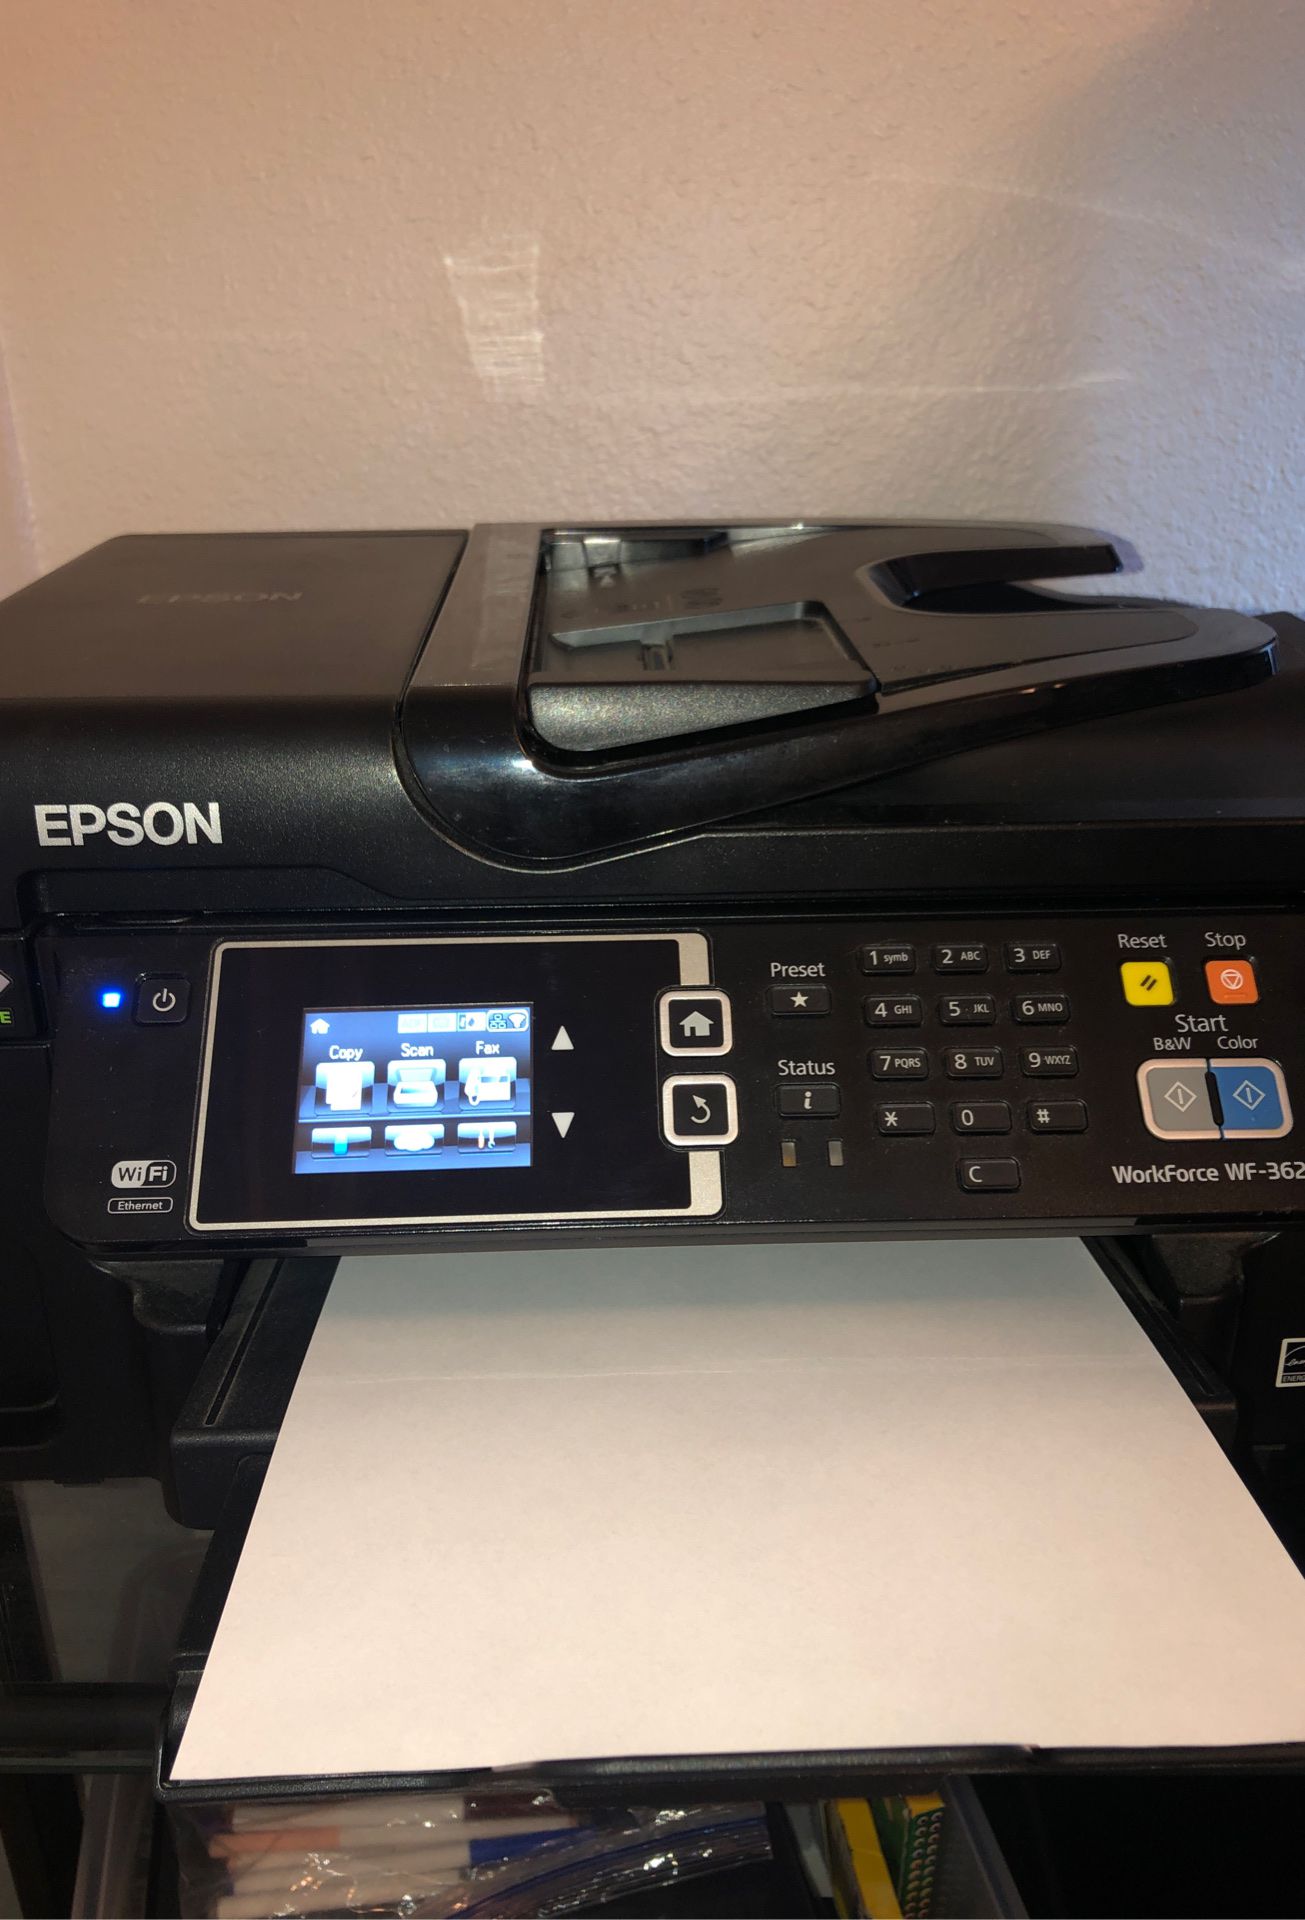 Epson WF-3640 (treasure for those who are tech savvy)